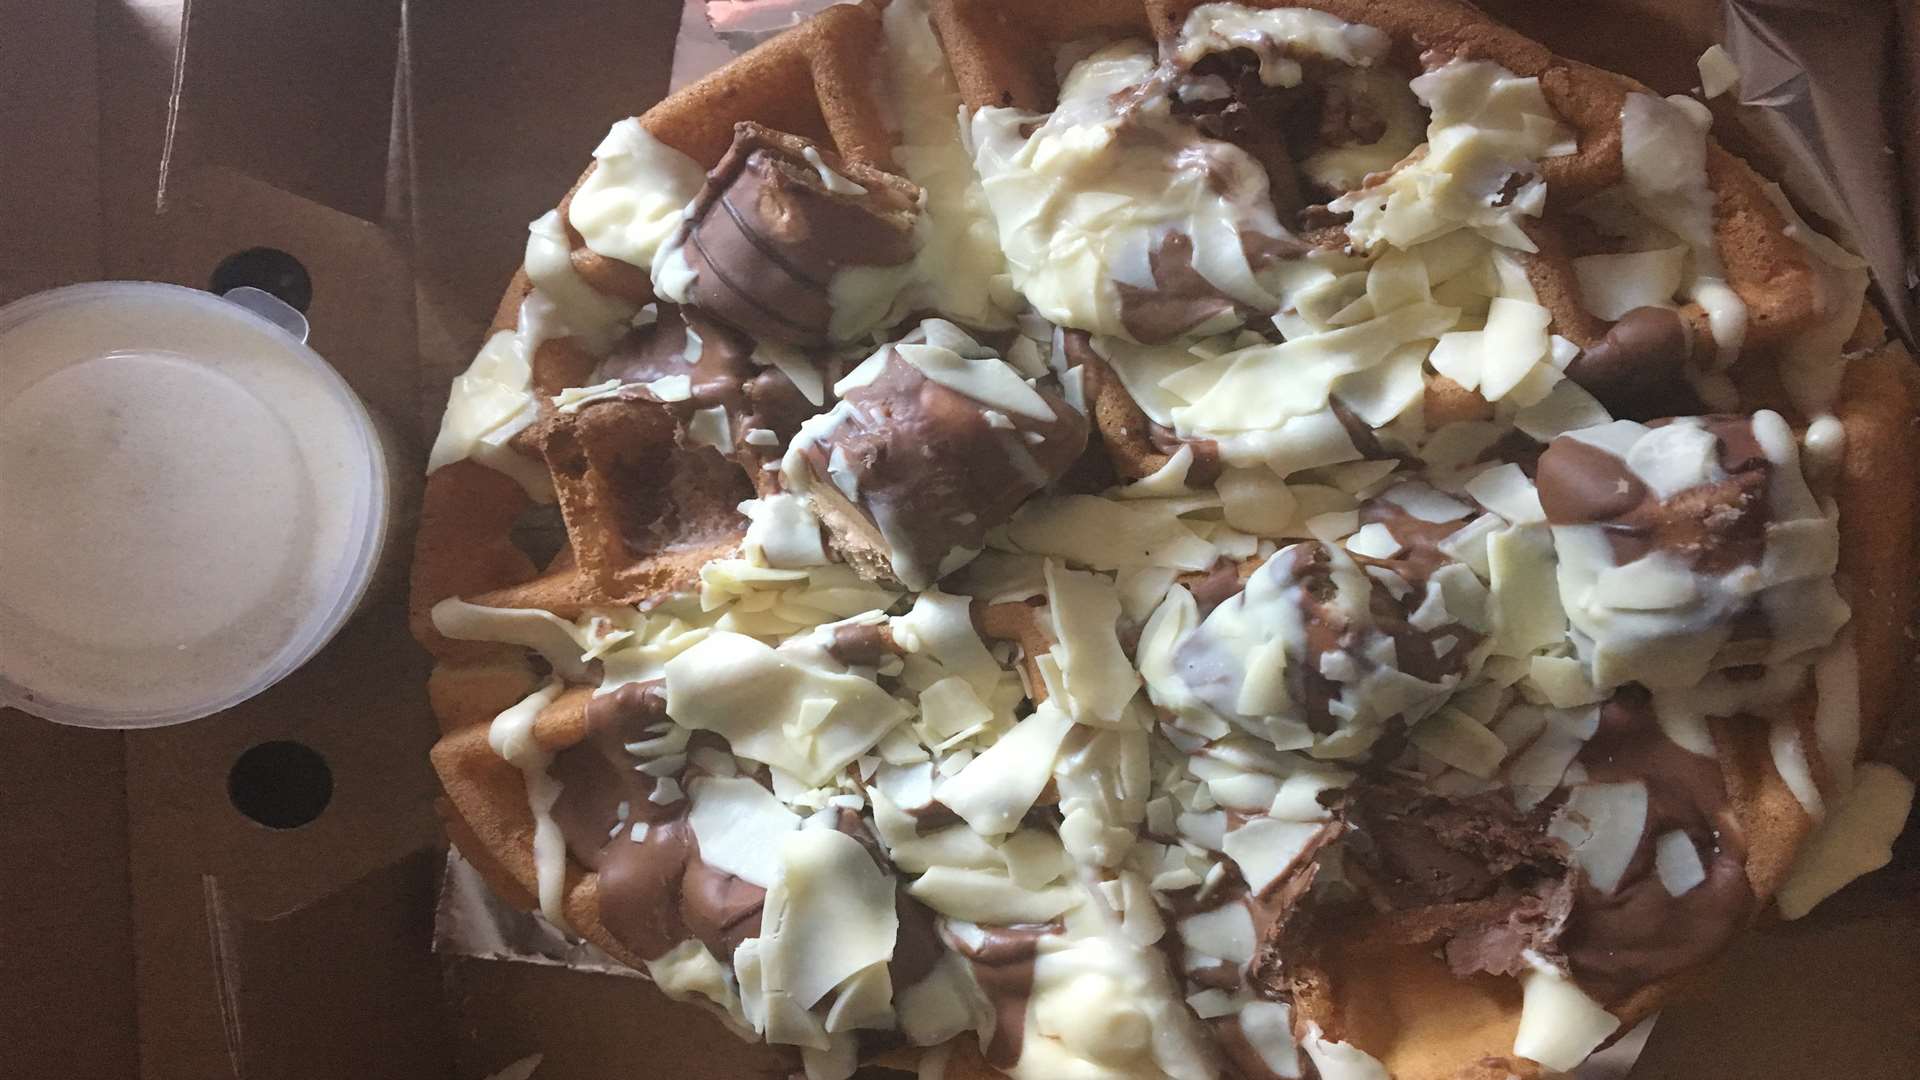 The Kinder Bueno waffle, which had toppings missing